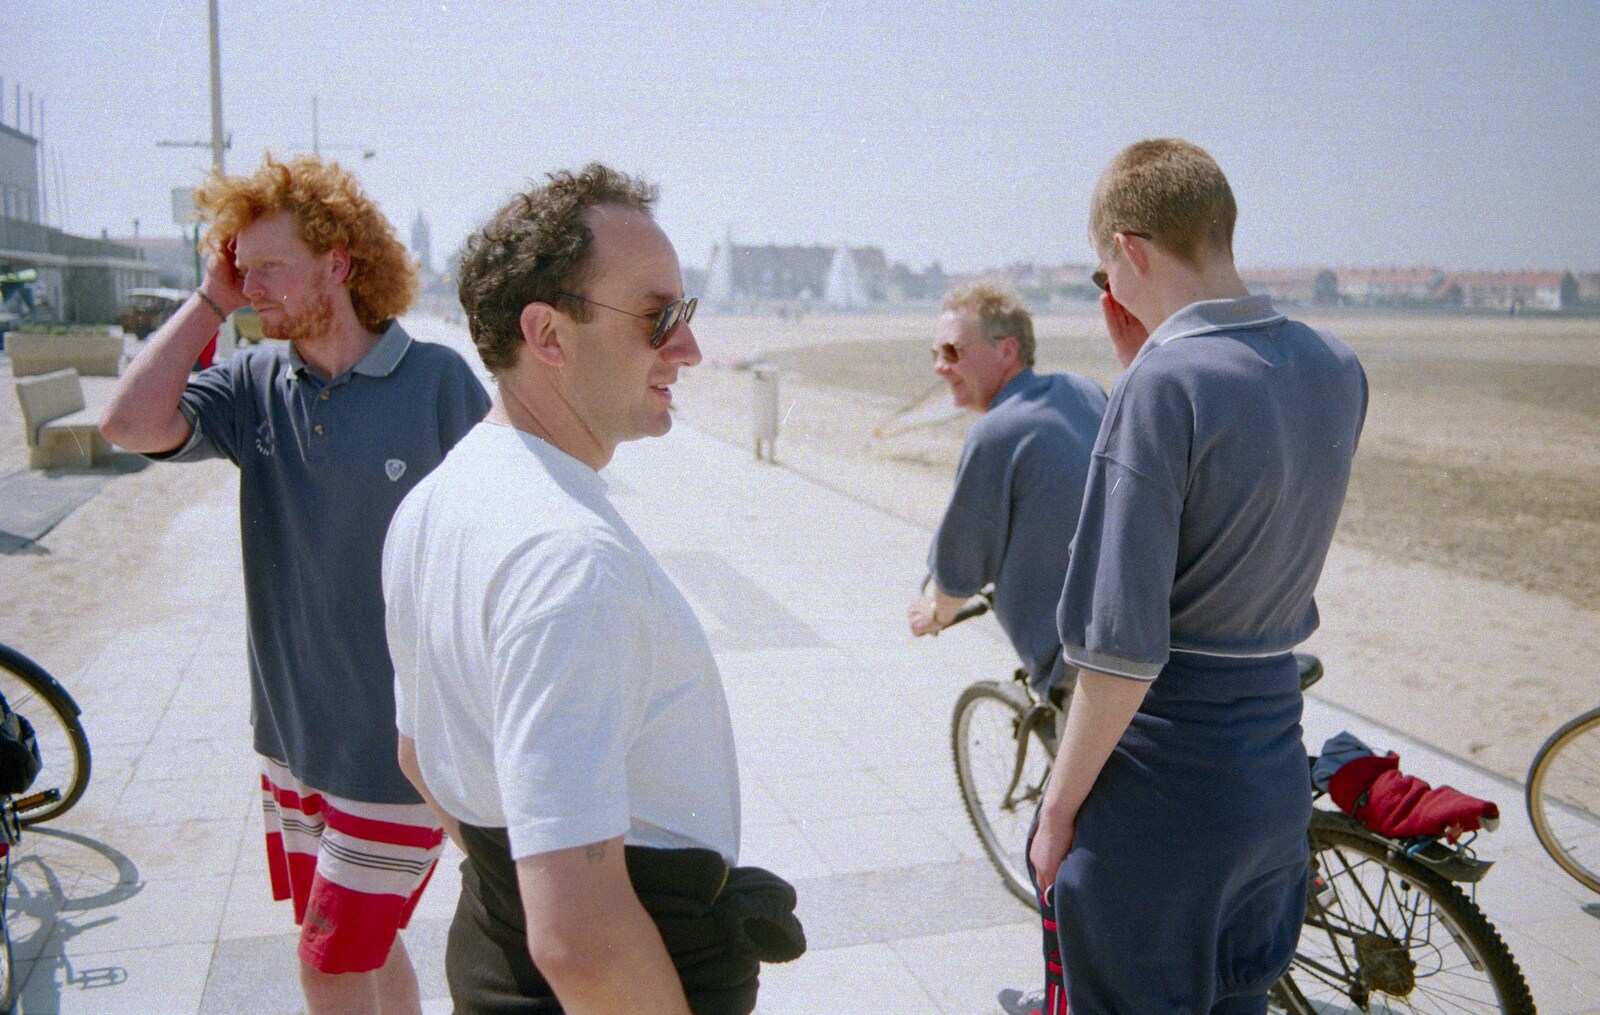 The boys on the beach from A BSCC Bike Ride to Gravelines, Pas de Calais, France - 11th May 2000